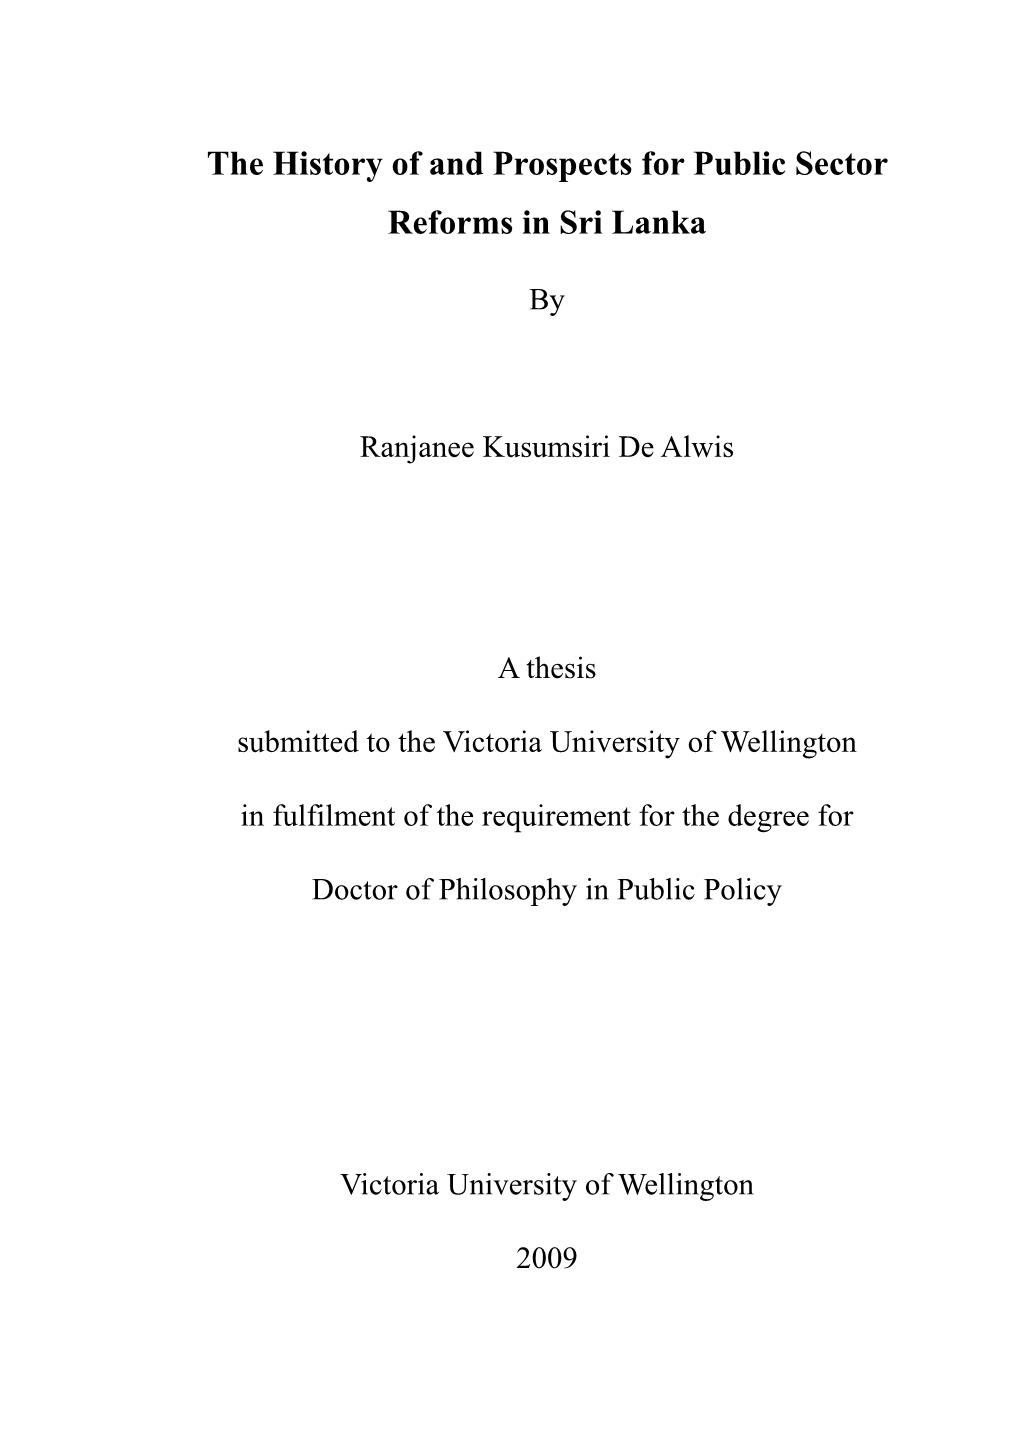 Public Sector Reforms in Sri Lanka from 1950- 2005